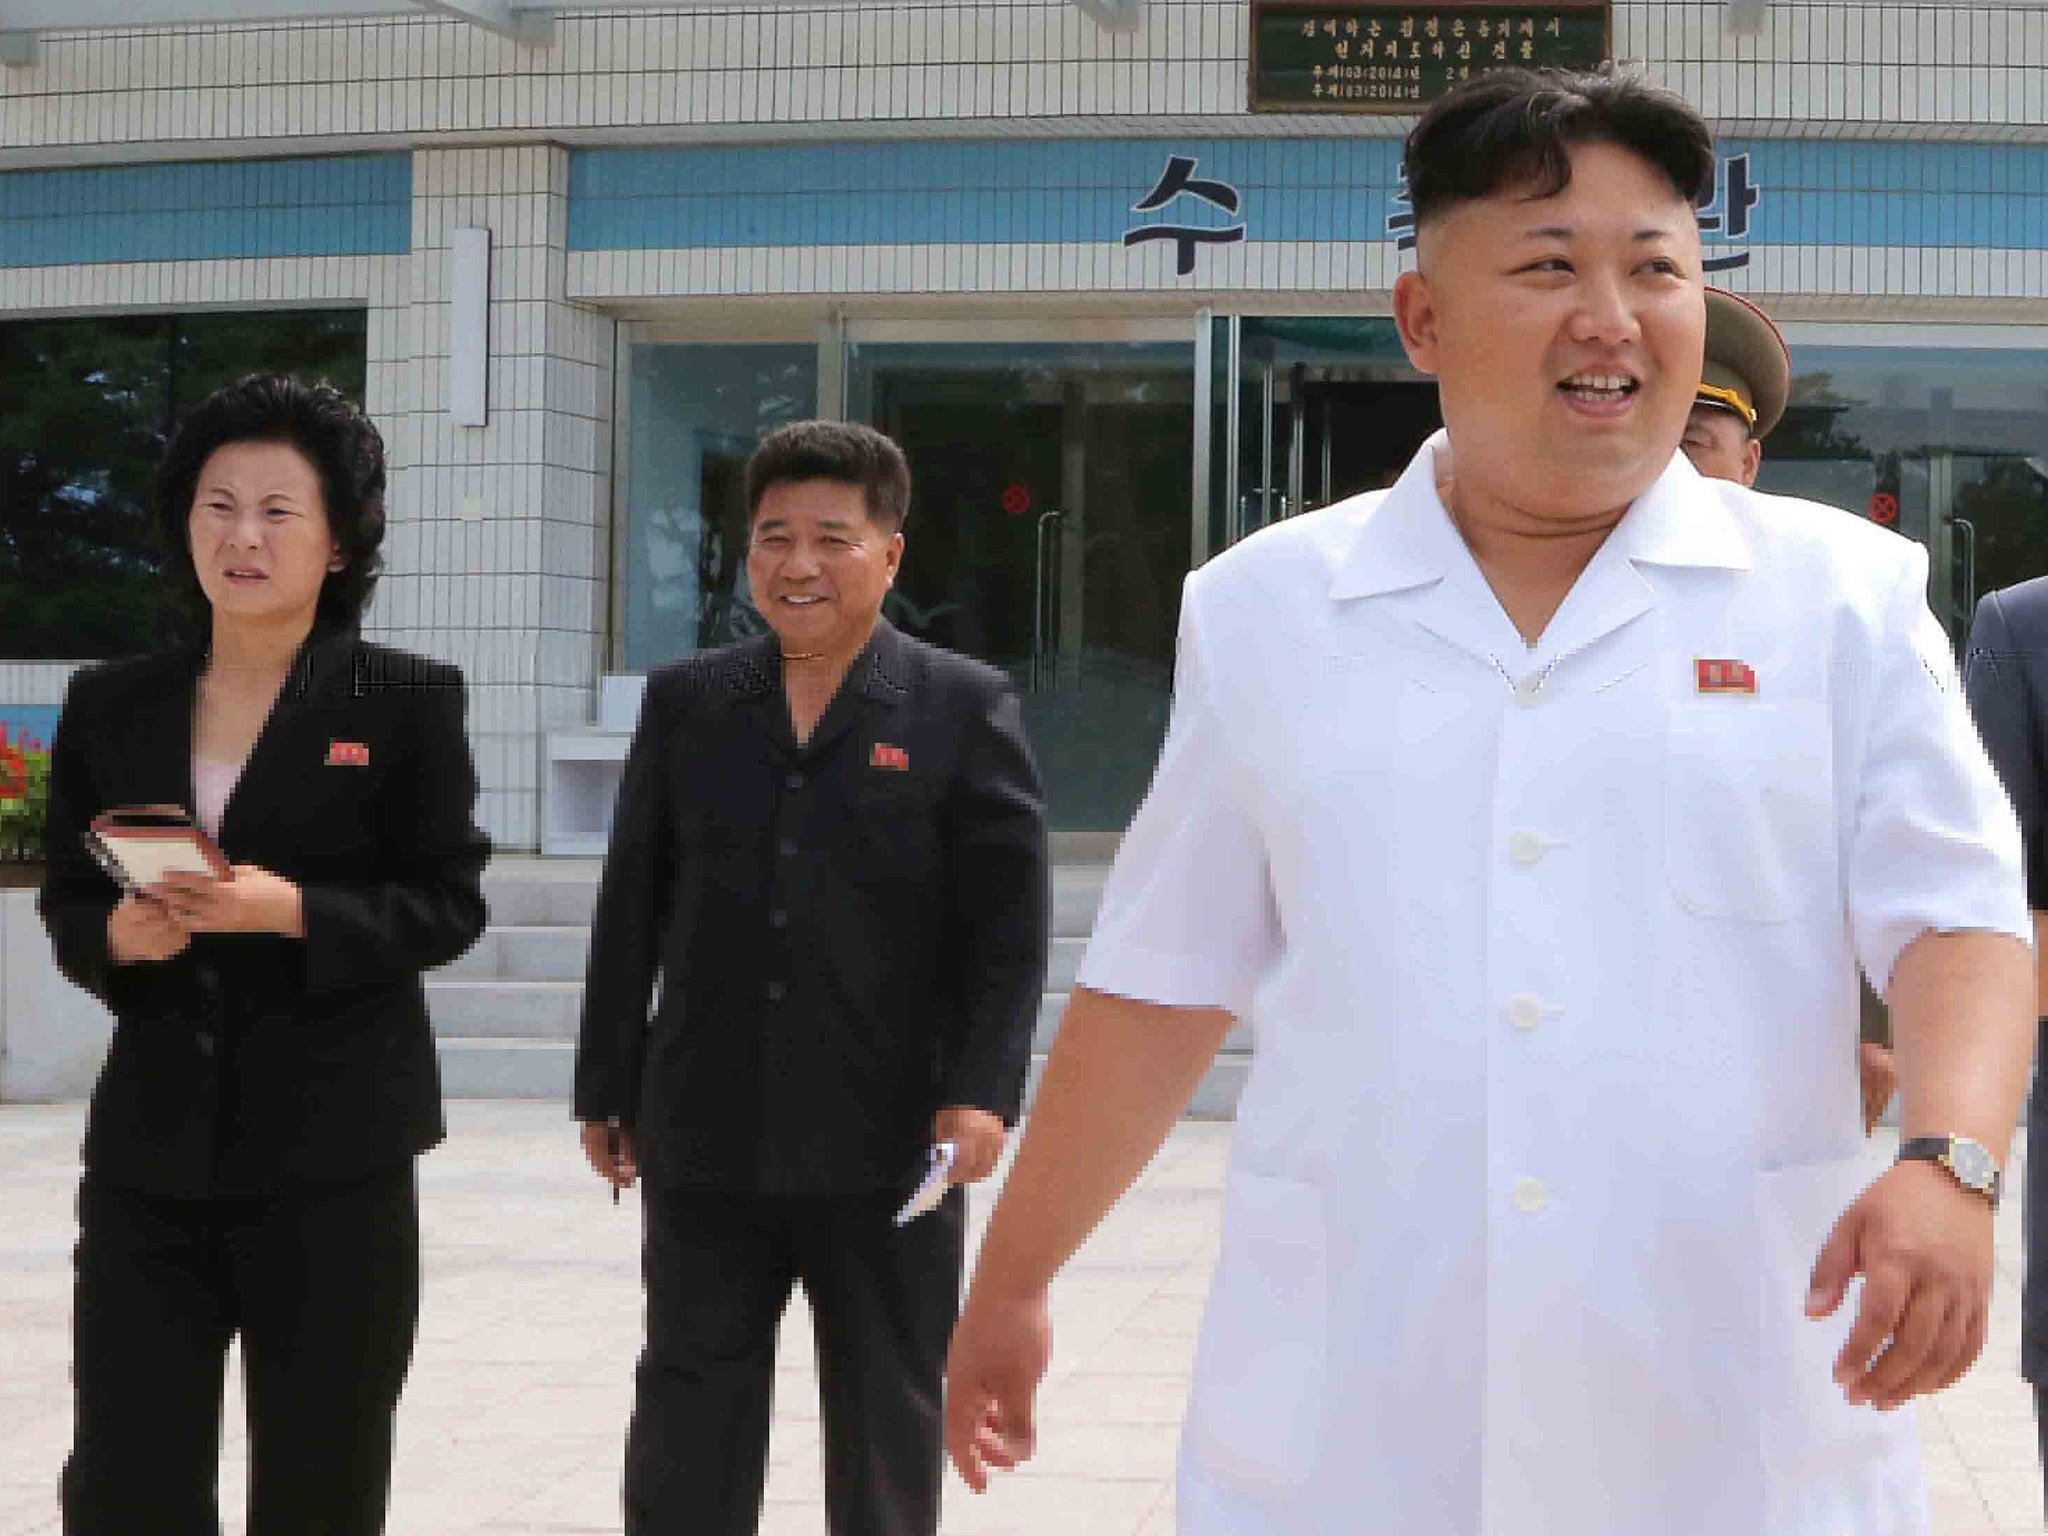 Kim Jong-un with his younger sister, Kim Yo-jong
(left), on one of the leader’s staged public appearances